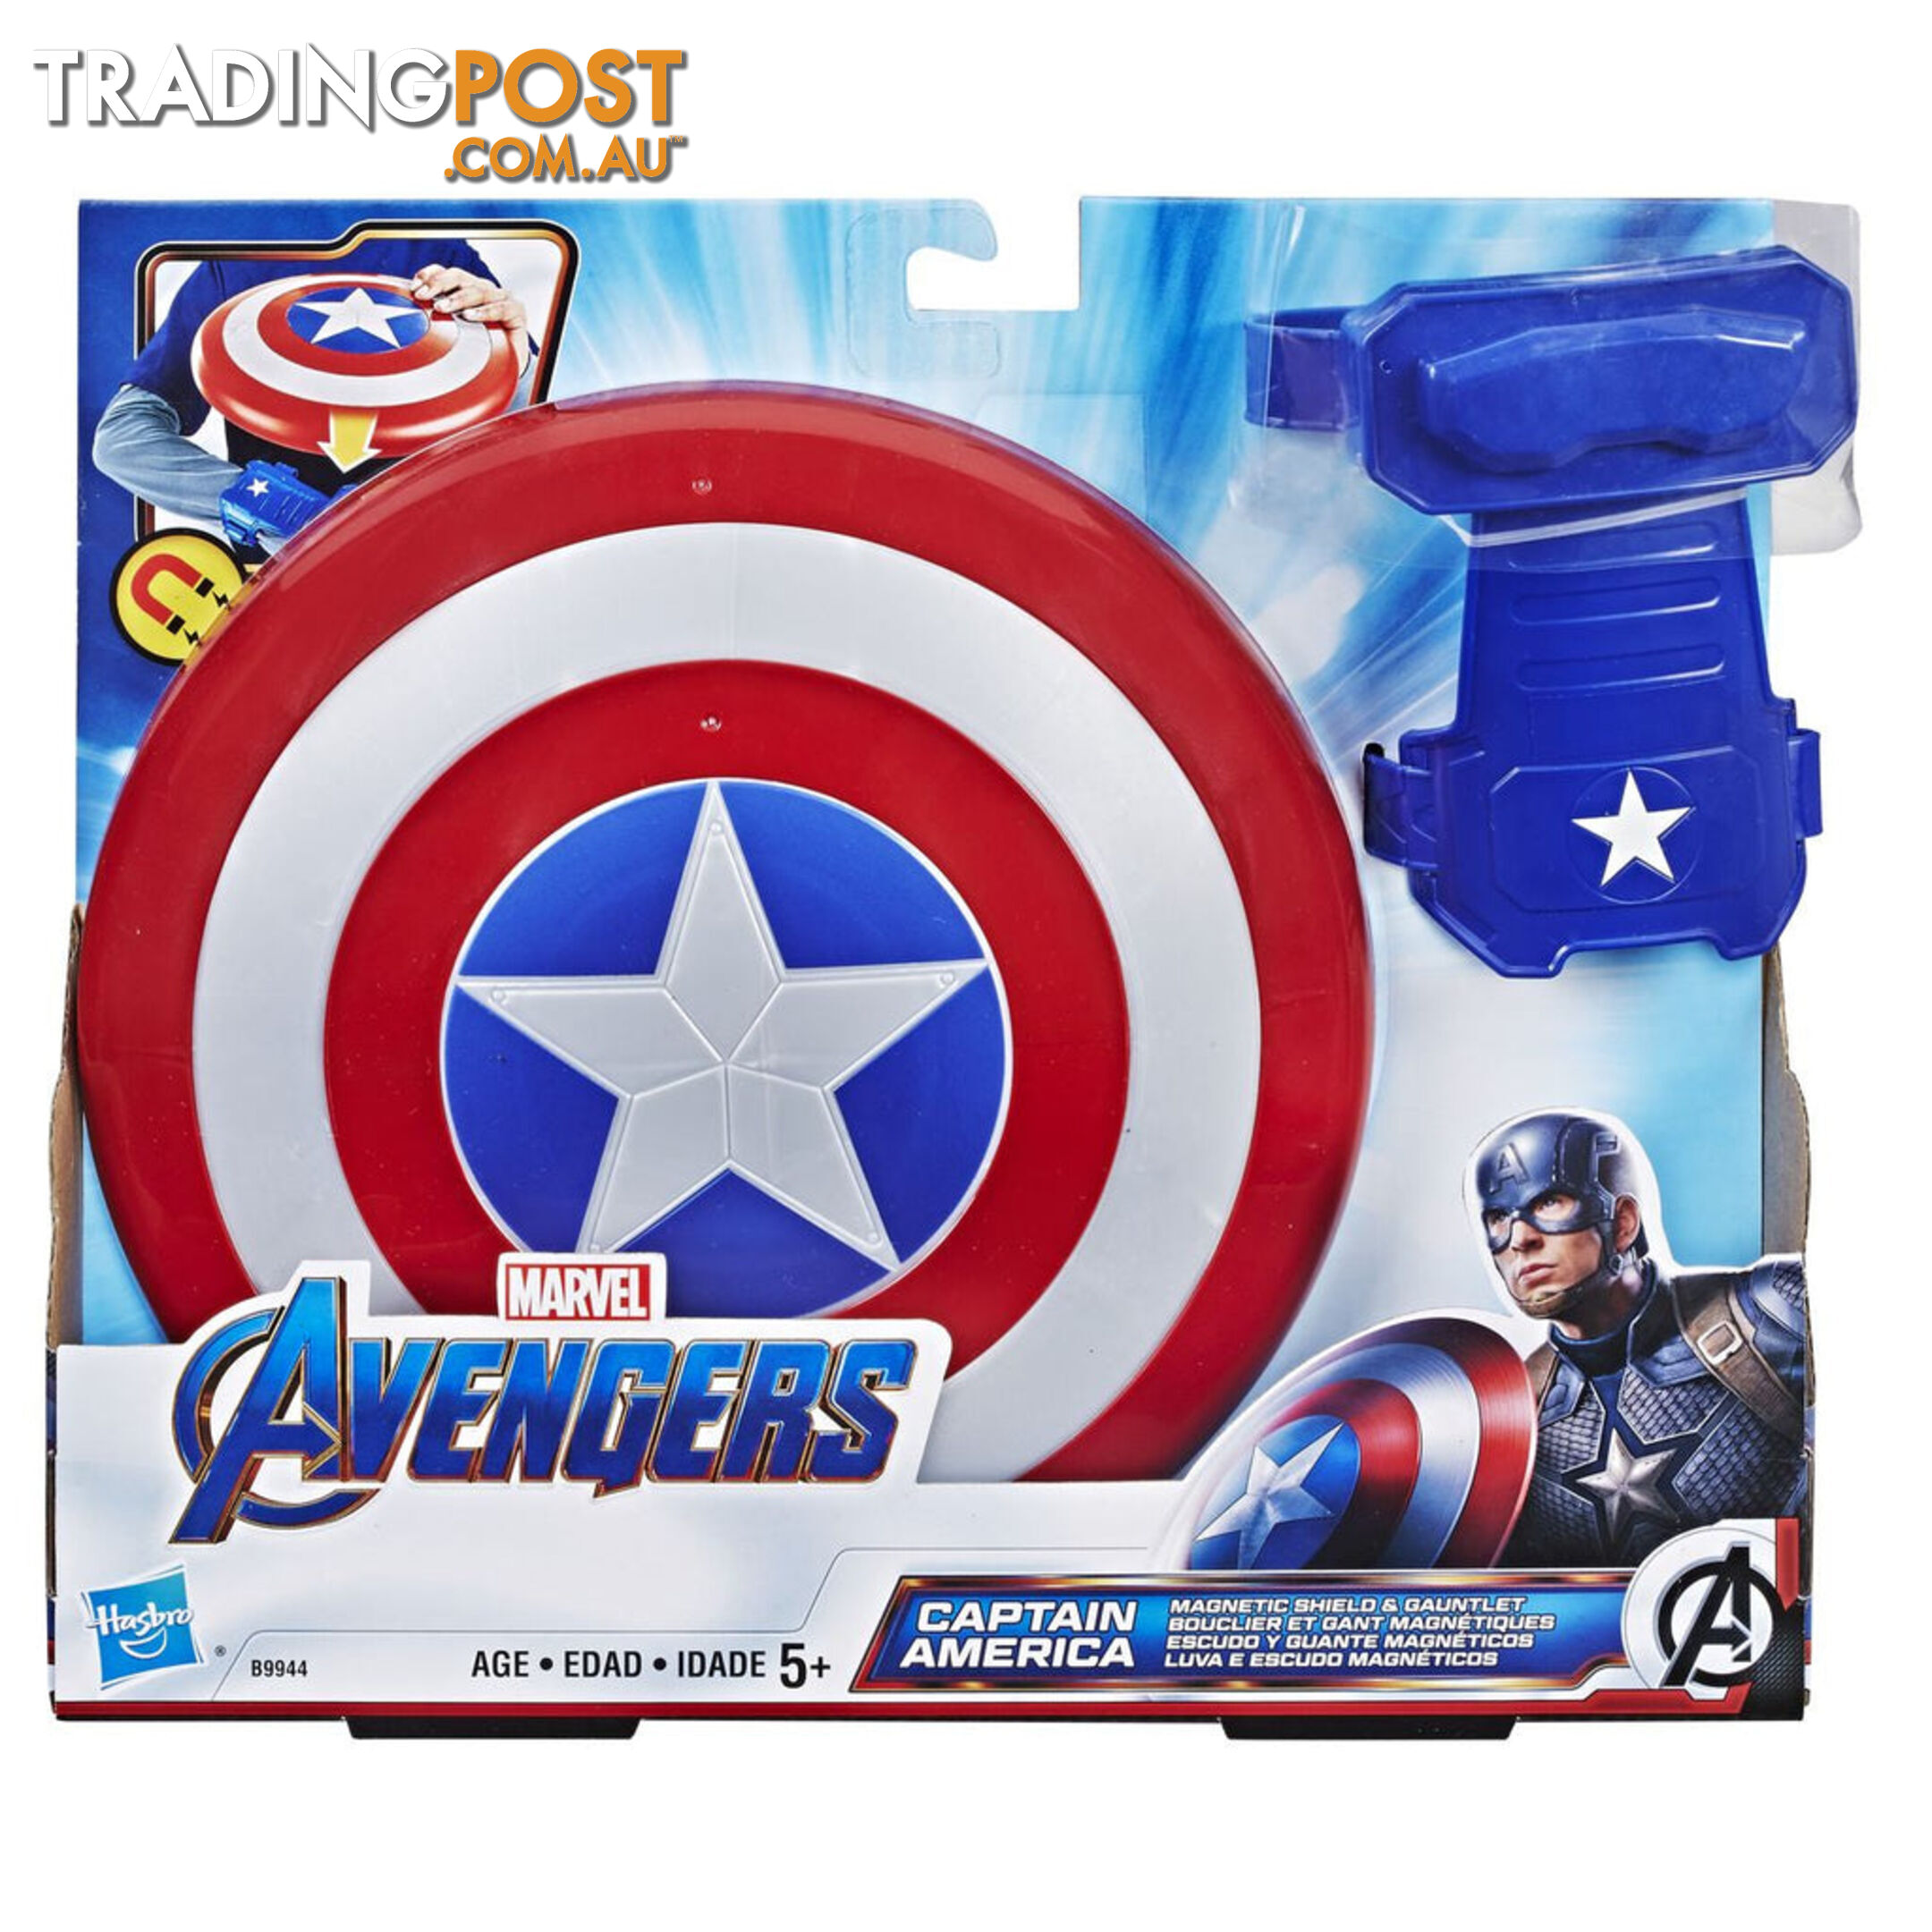 Avengers Captain America Magnetic Shield And Gauntlet - Hbb9944 - 630509807765